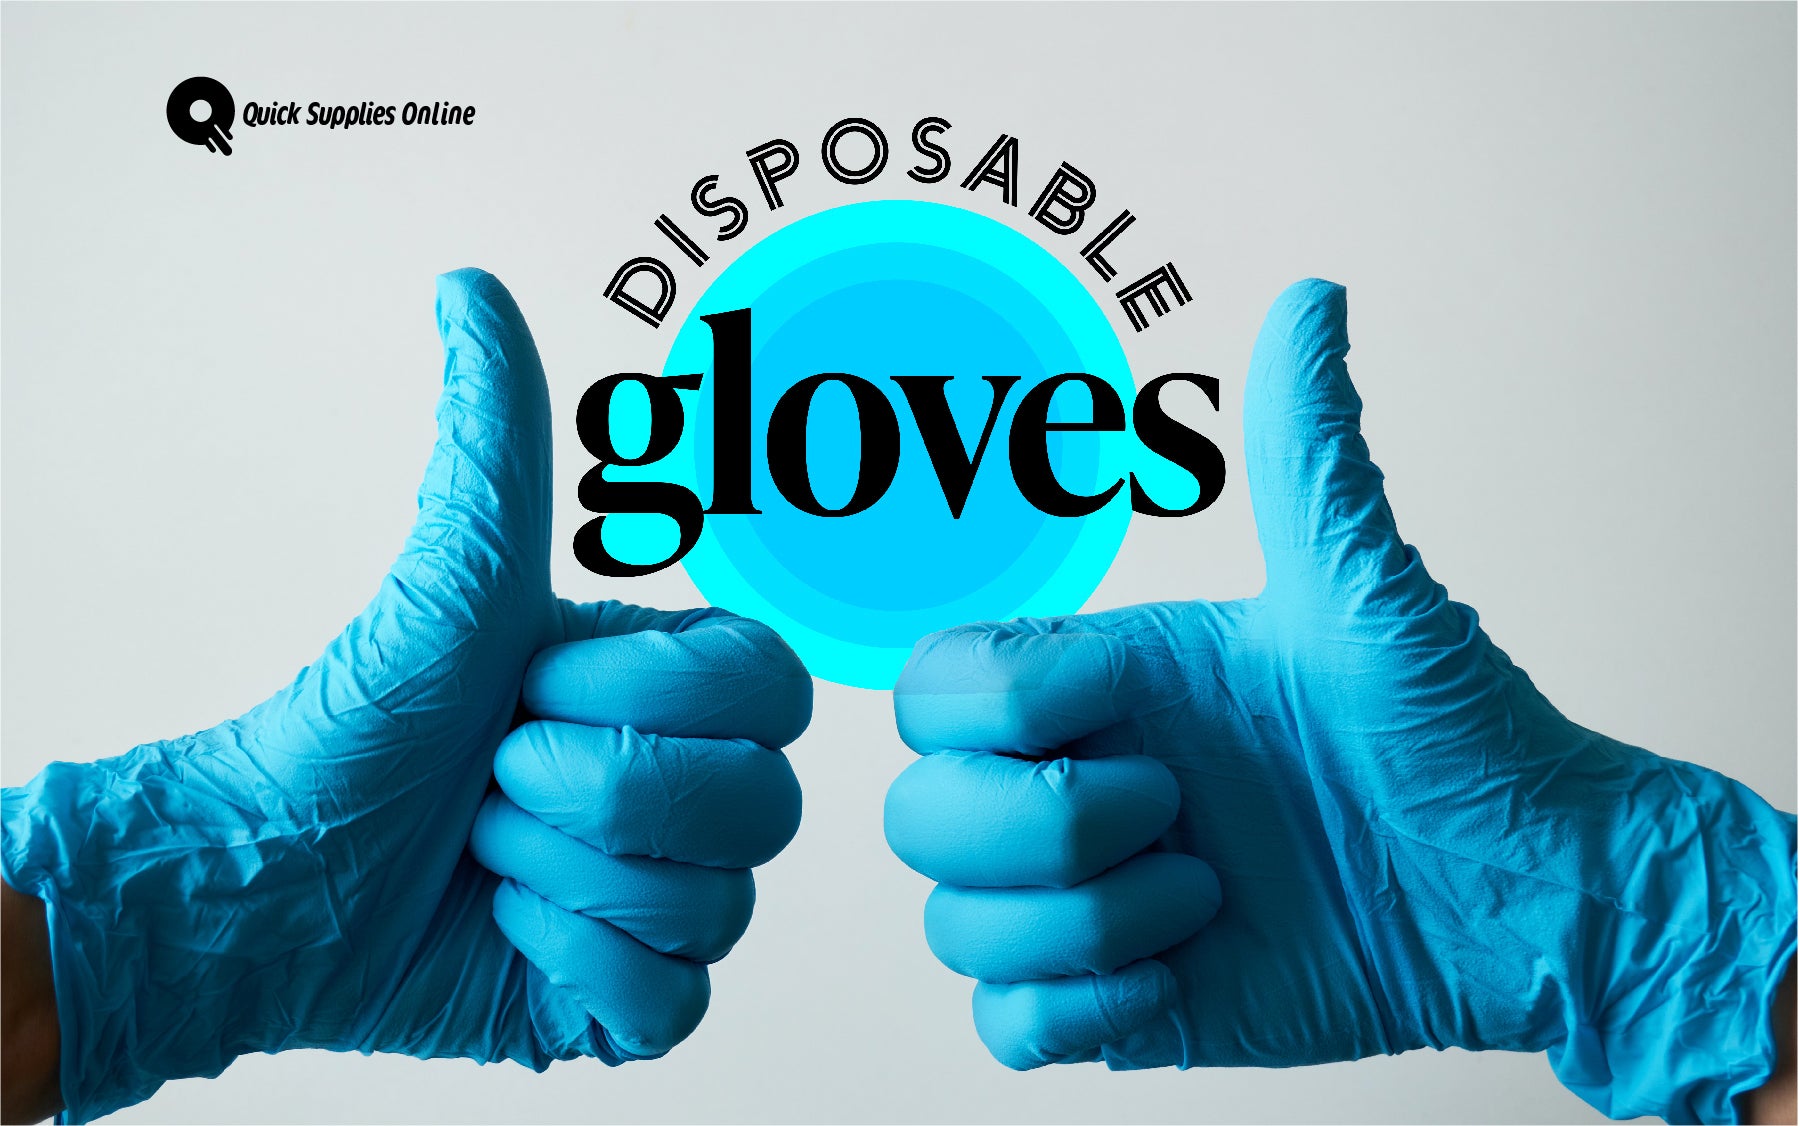 Guide for Buying Disposable Gloves